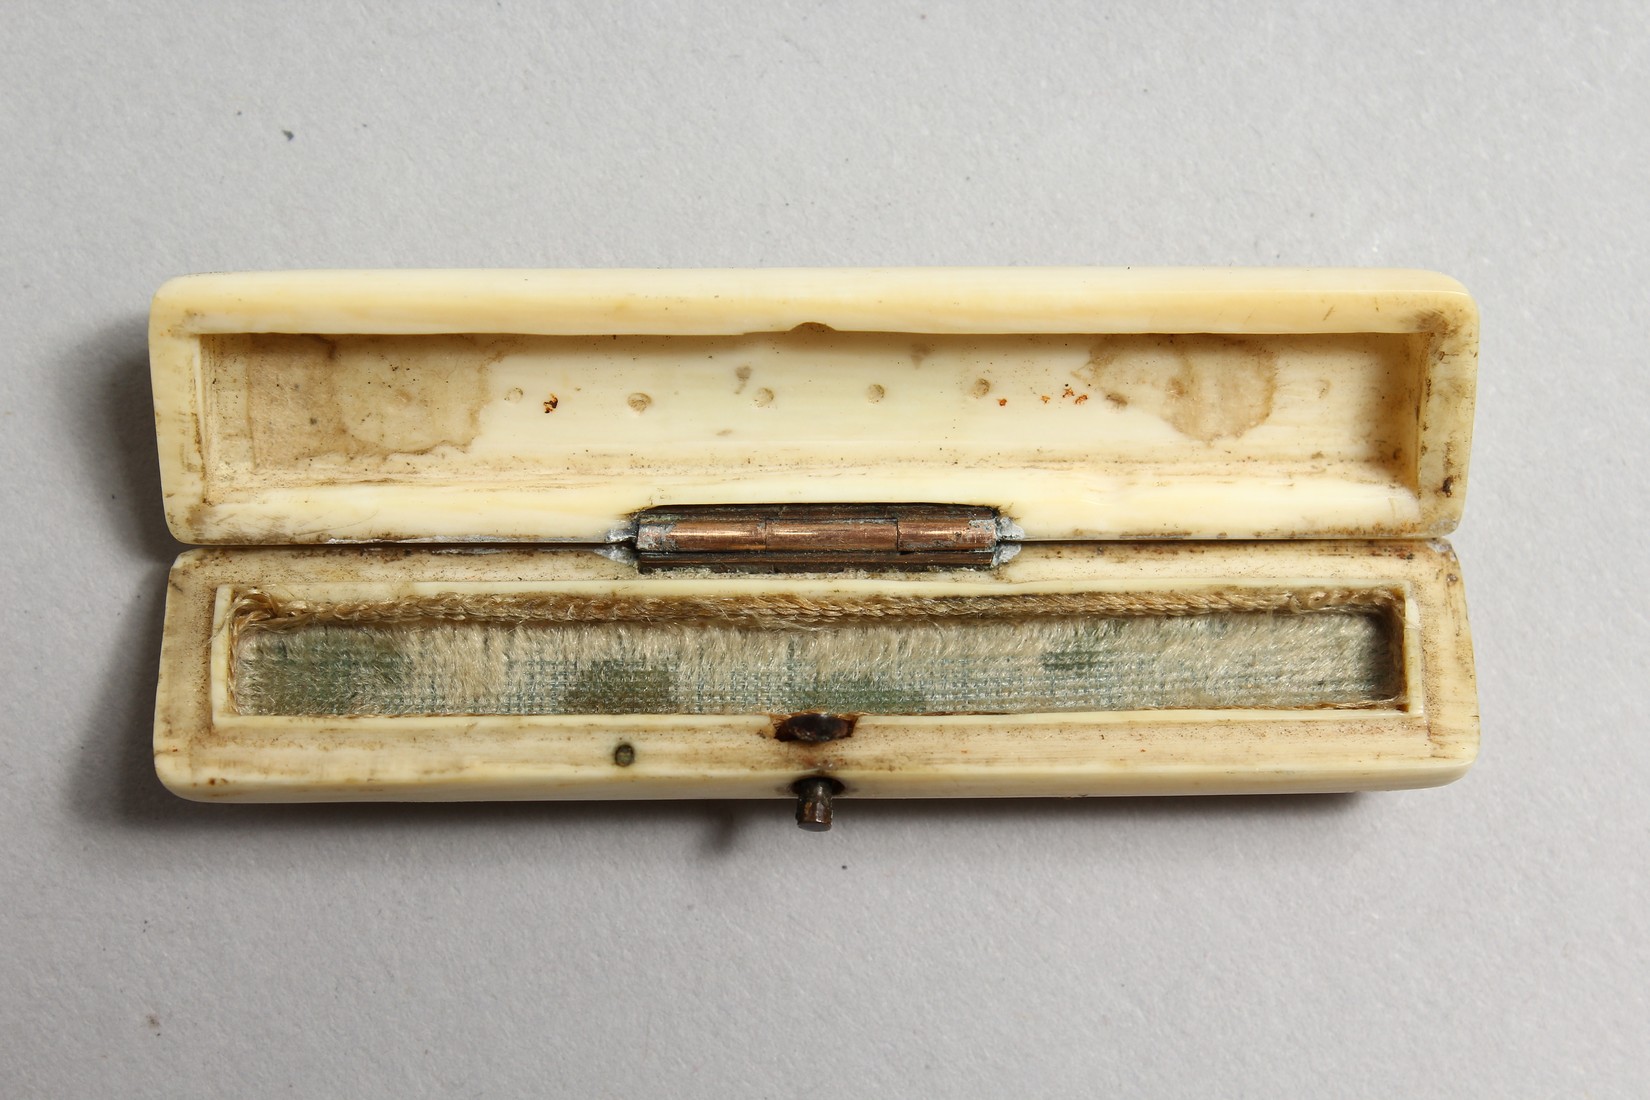 A GEORGIAN IVORY AND GOLD TOOTHPICK CASE. 2.25ins long. - Image 6 of 6